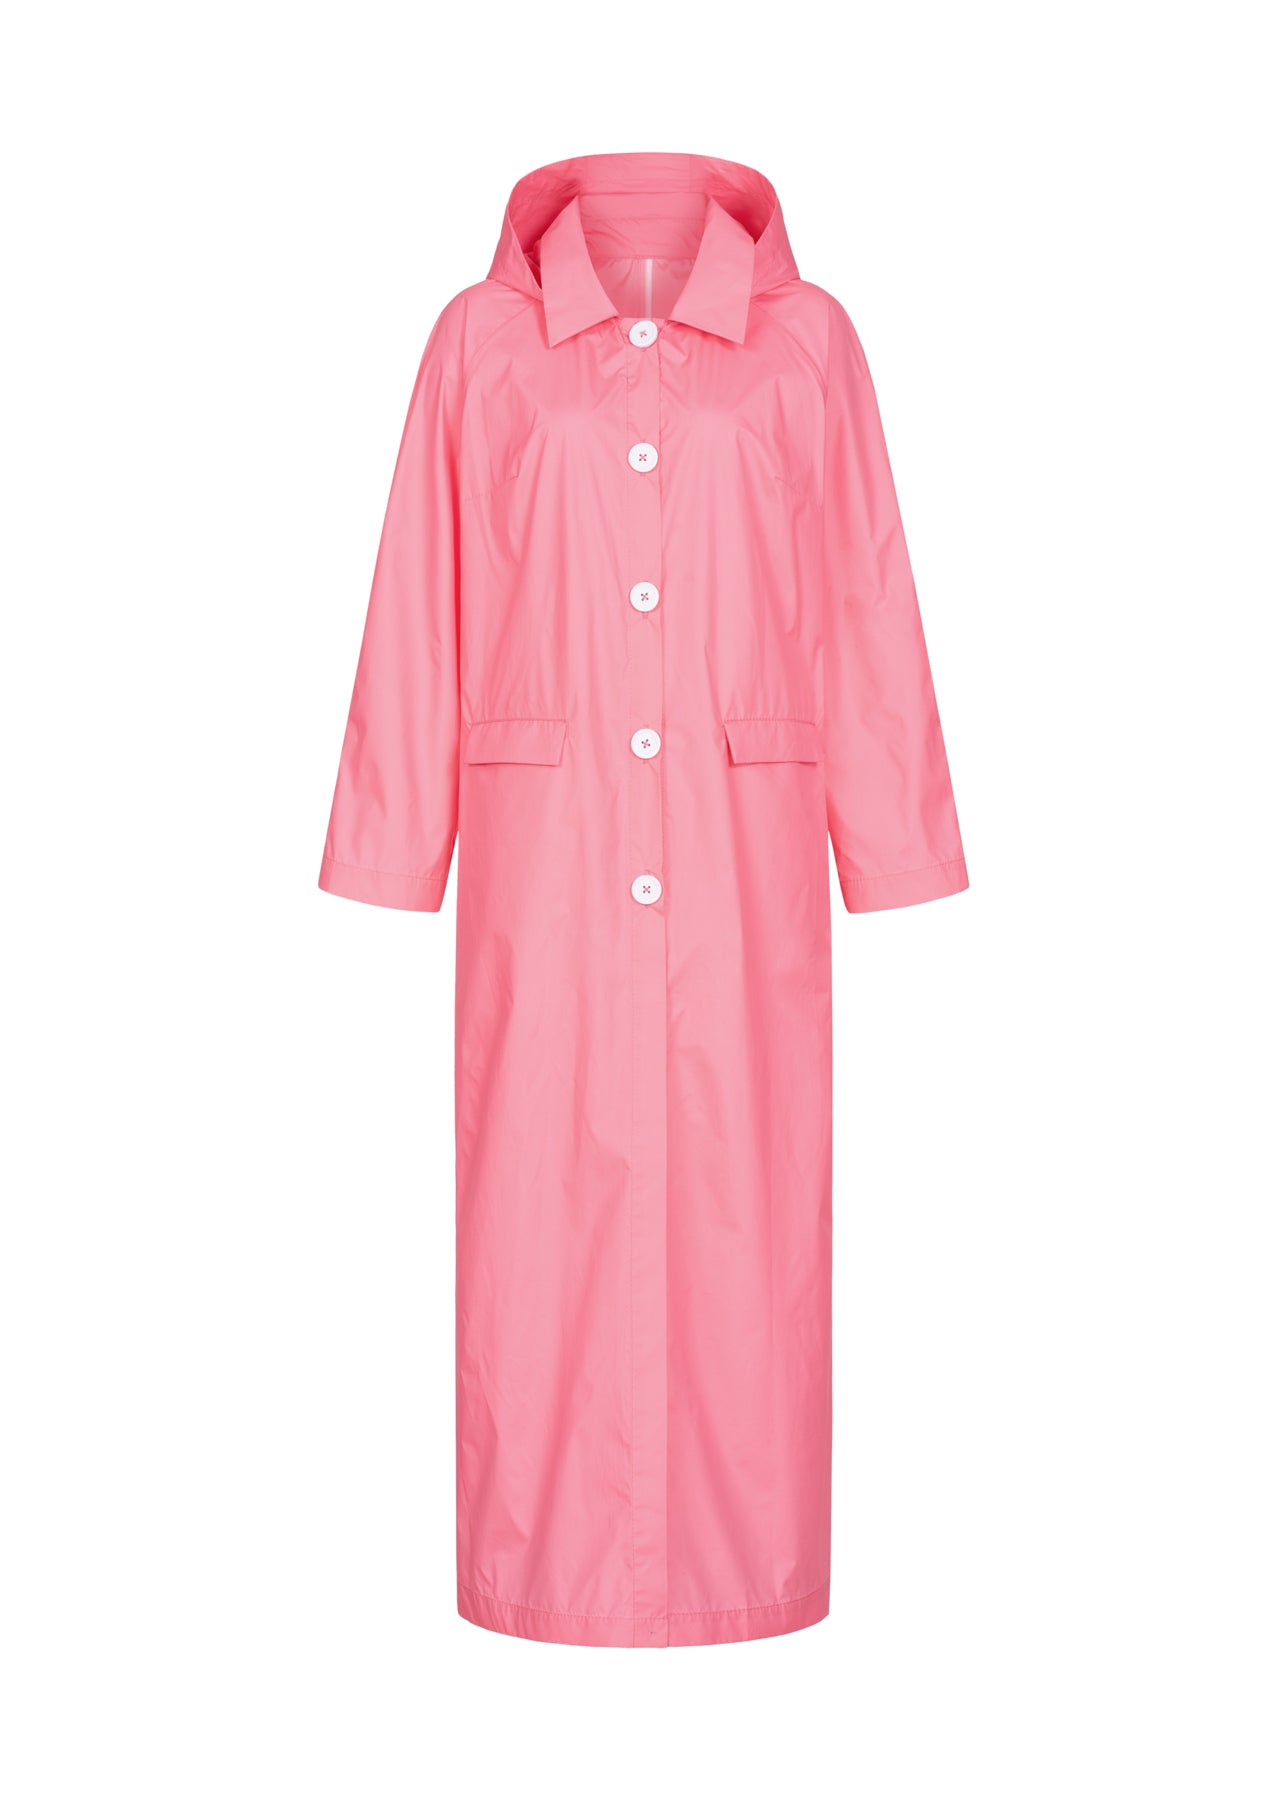 Pink waterproof raincoat with removable hood